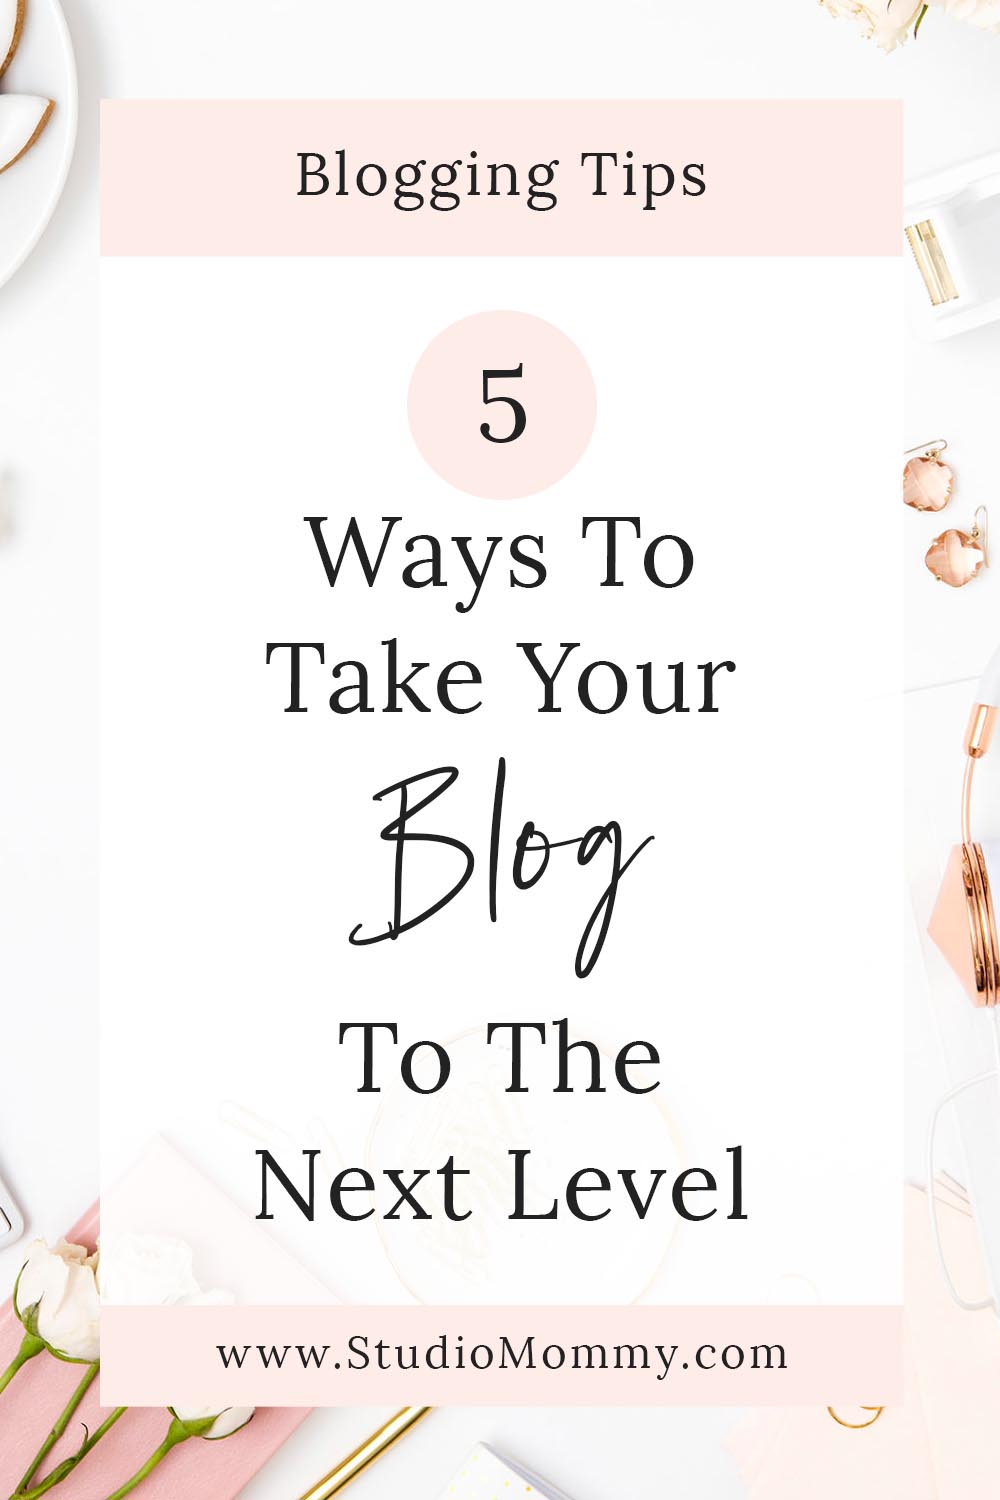 If you're like most bloggers, you want to expand your audience and offer your readers more of what they're looking for. However, it's often easier said than done, especially if you're already  pouring your heart and soul into your blog. Here are some easy, practical tips to get you started on improving what's already great! #blog #blogging #blogger #wordpress